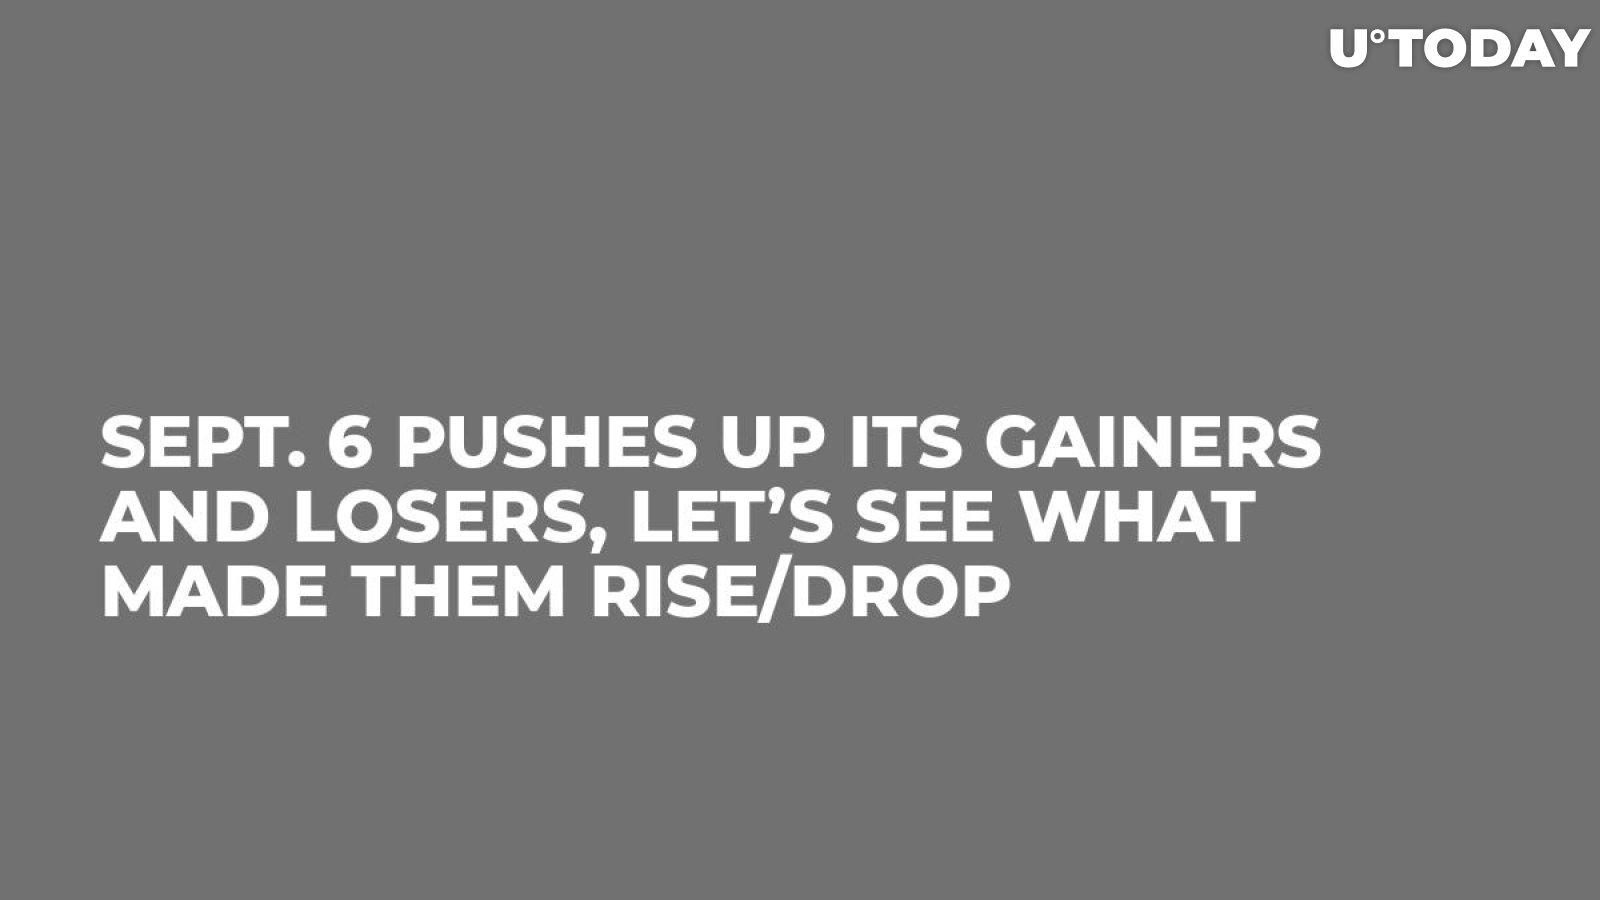 Sept. 6 Pushes Up Its Gainers and Losers, Let’s See What Made Them Rise/Drop